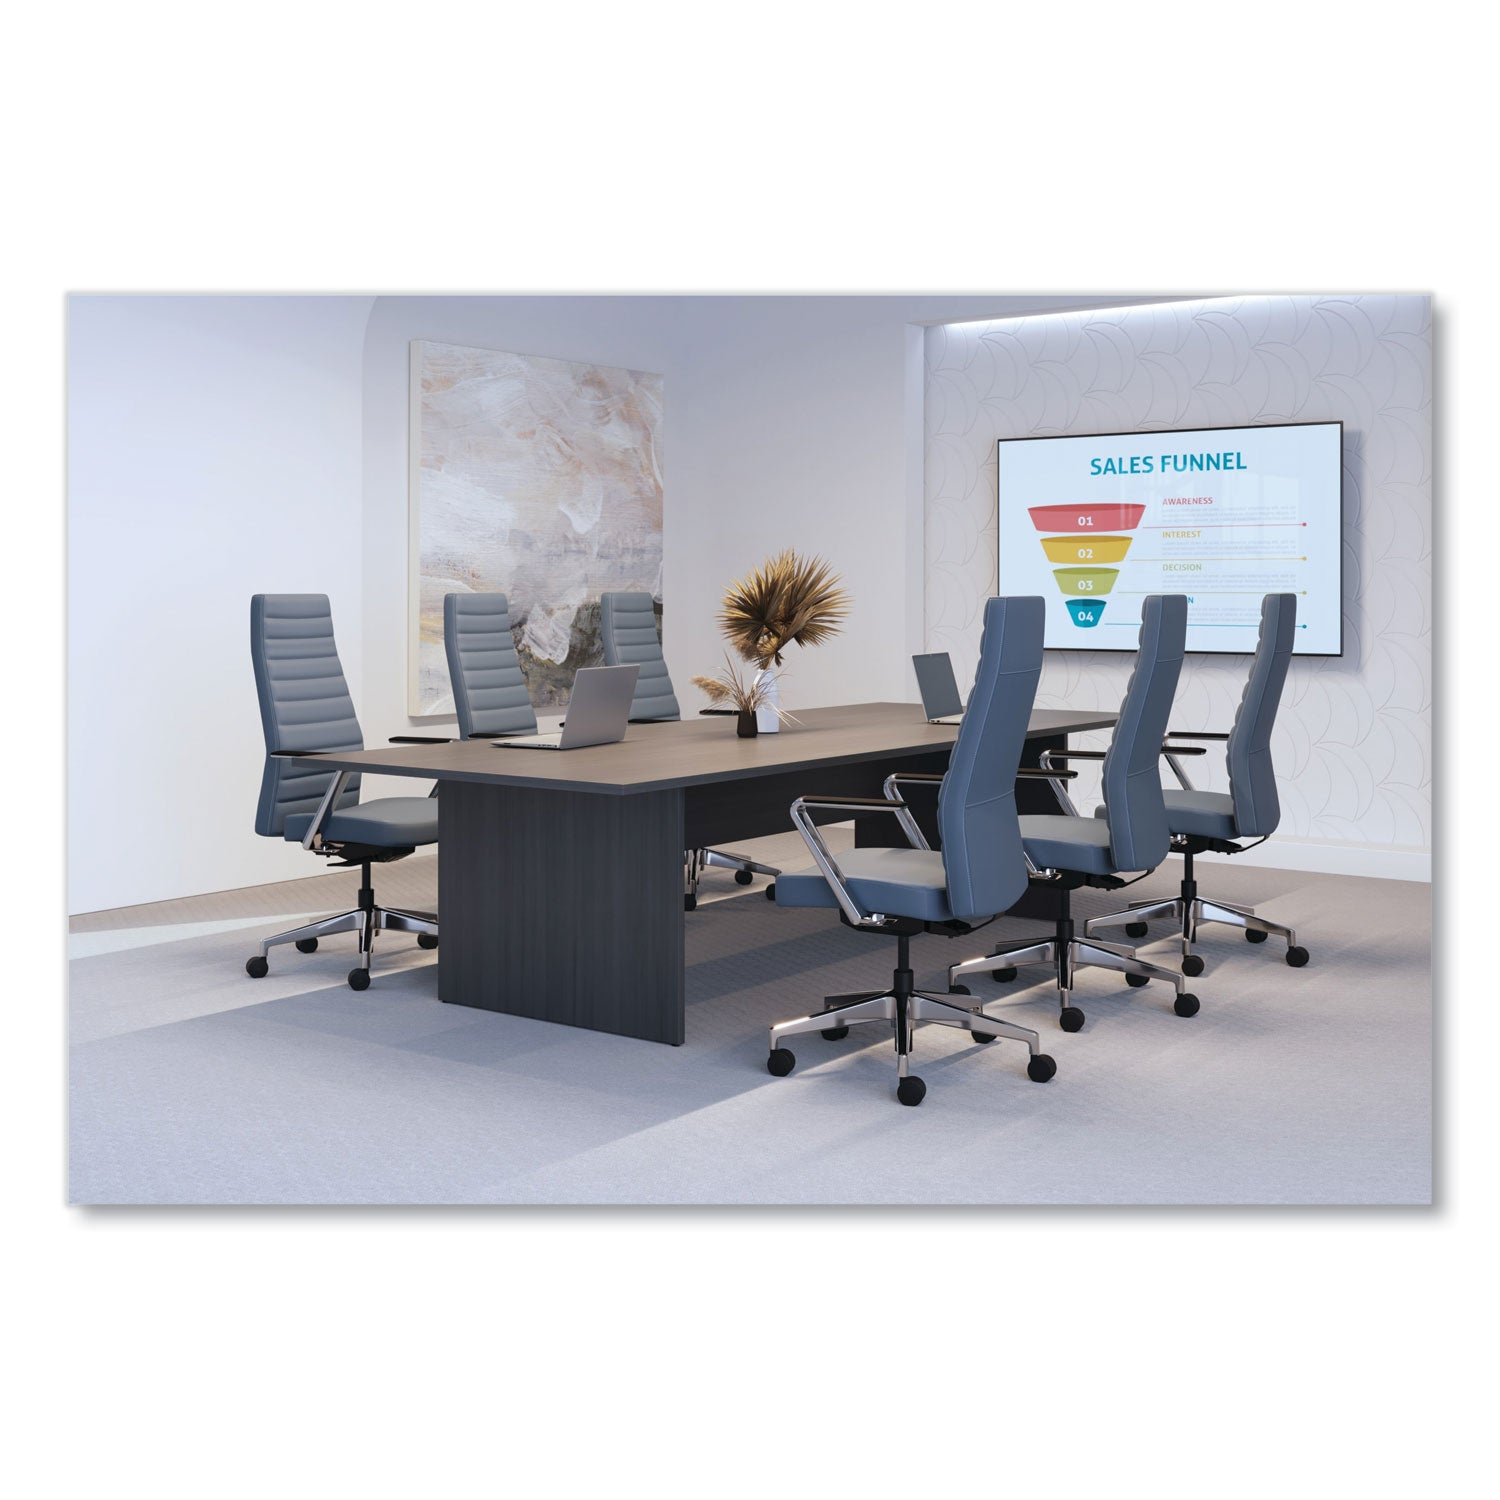 cofi-executive-high-back-chair-supports-up-to-300-lb-nimbus-seat-back-polished-aluminum-base-ships-in-7-10-business-days_honceuw0pu93c9p - 4